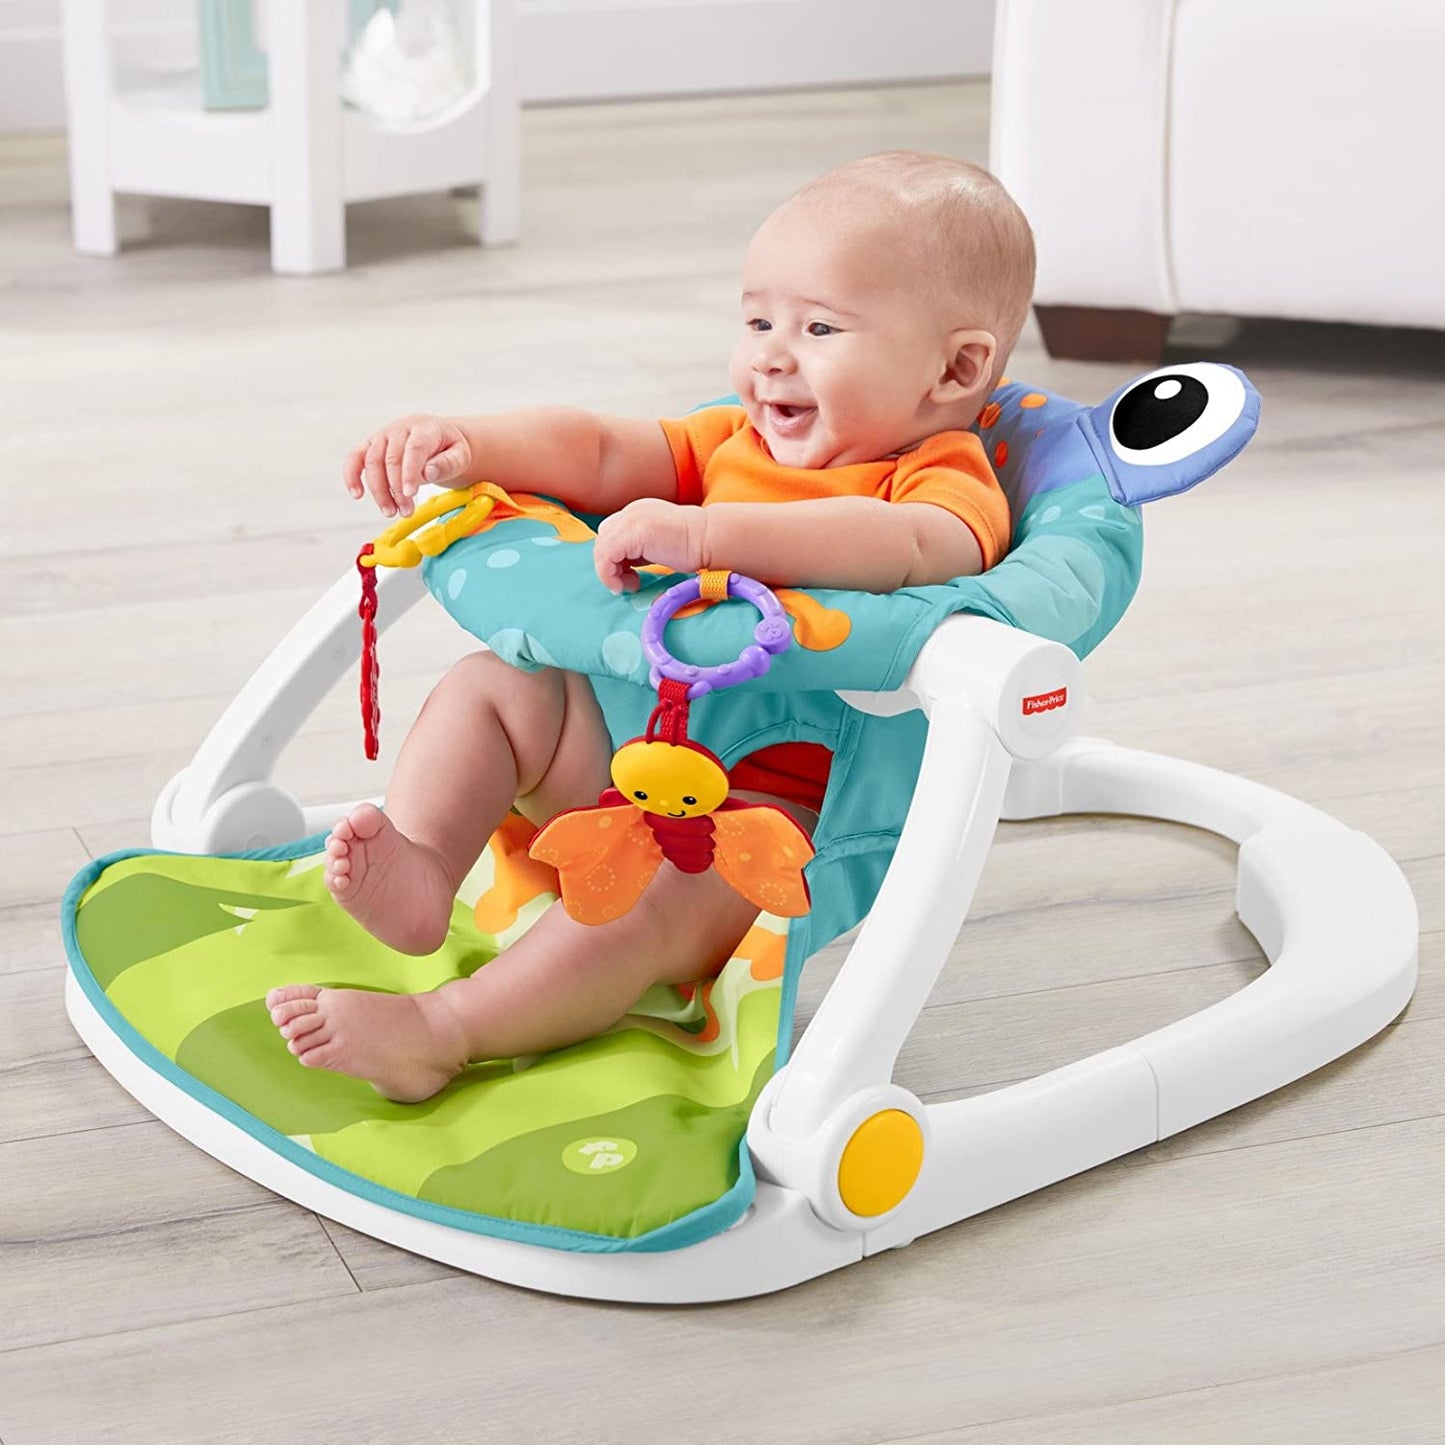 COOLBABY Green Baby Upright Floor Seat with Play Mat - COOL BABY